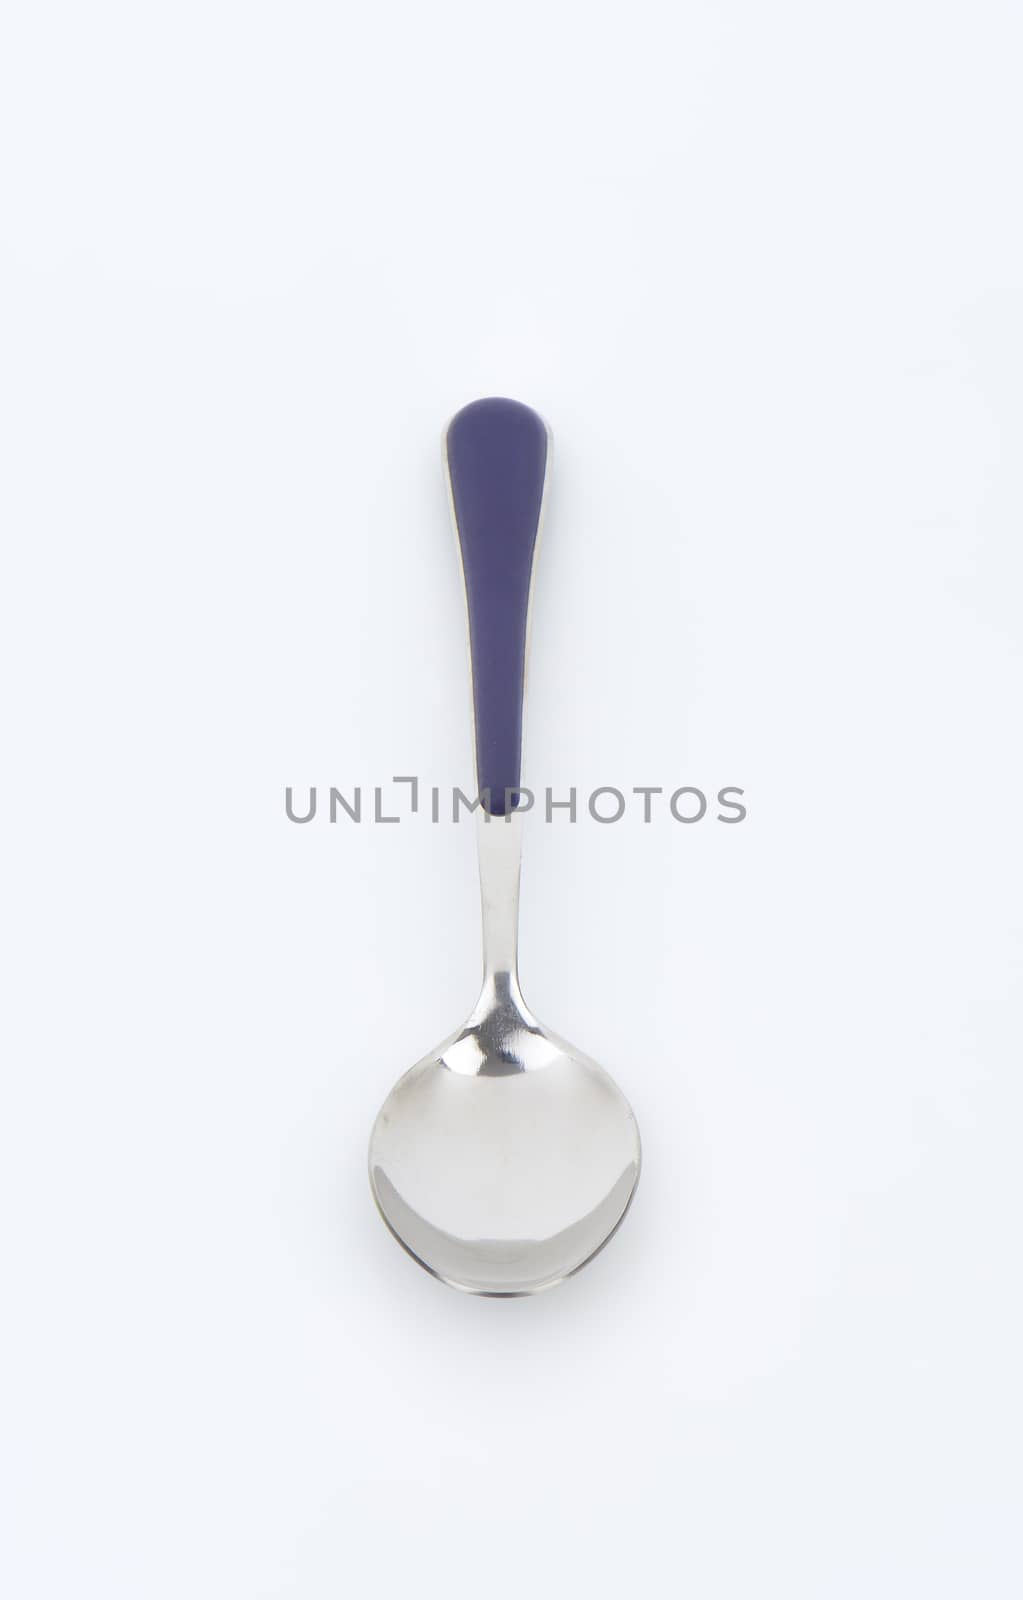 Small table spoon by Digifoodstock